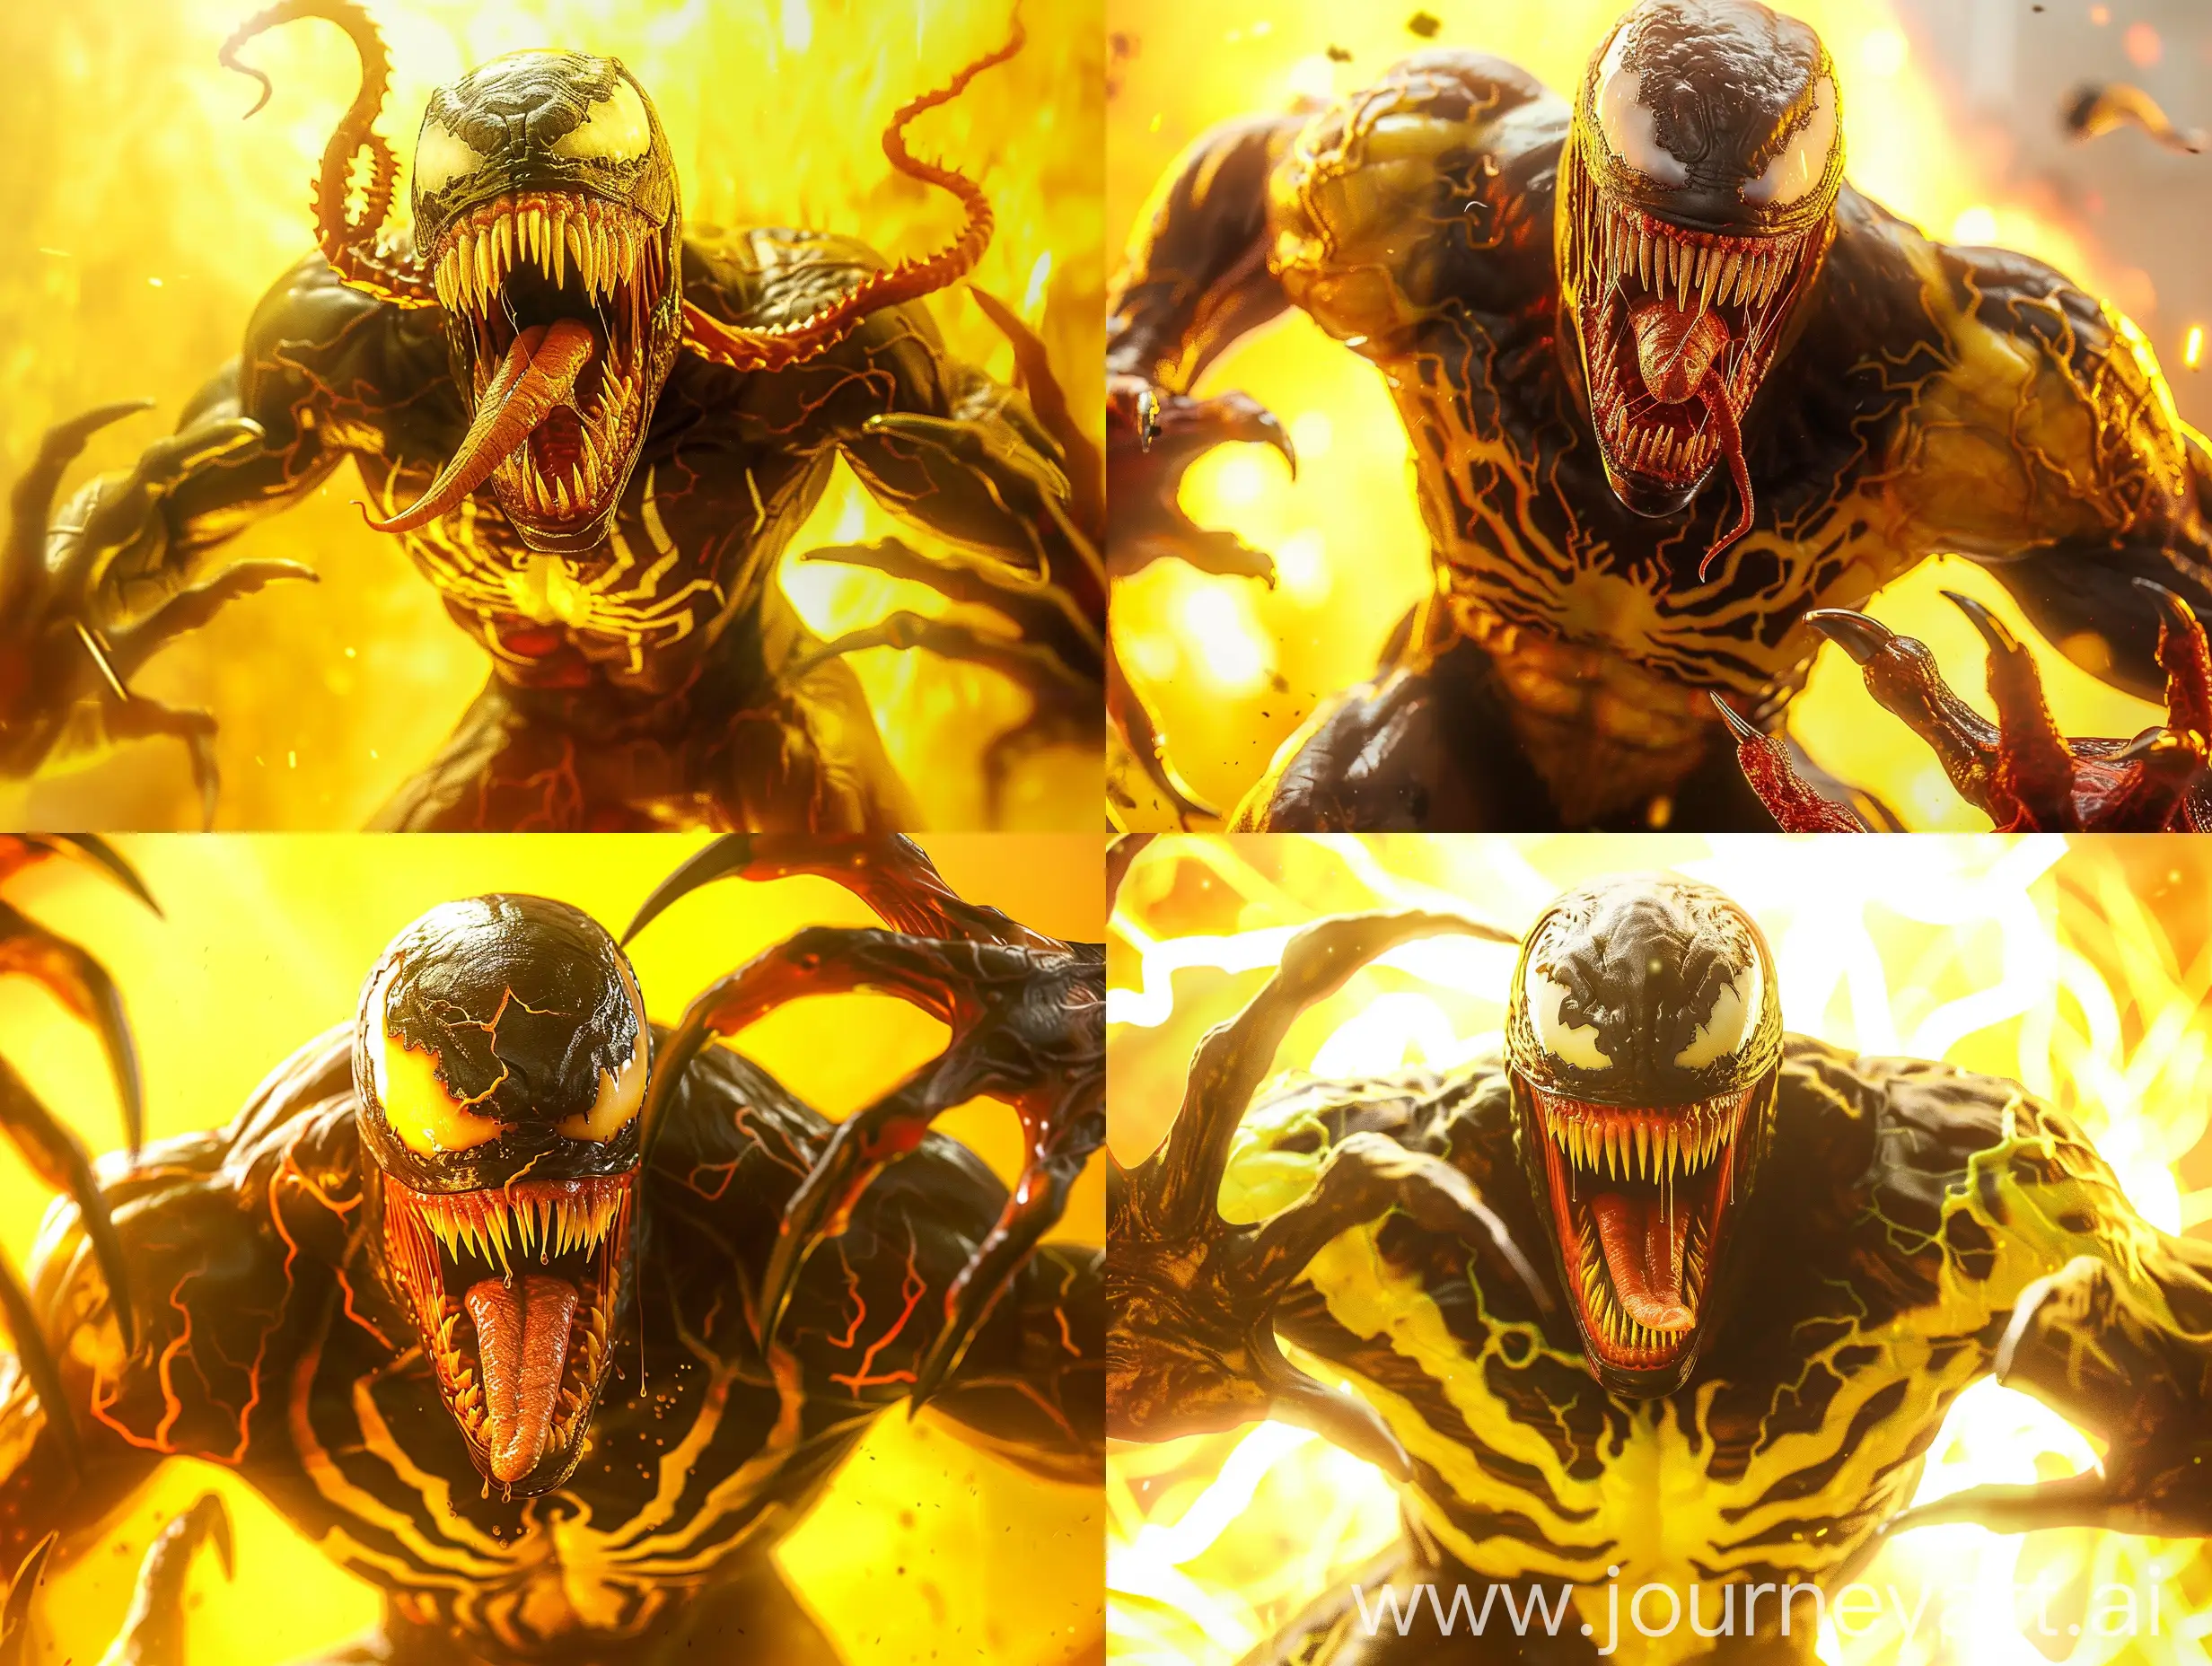 Marvels-Venom-Jumps-into-the-Camera-with-Open-Mouth-and-Claws